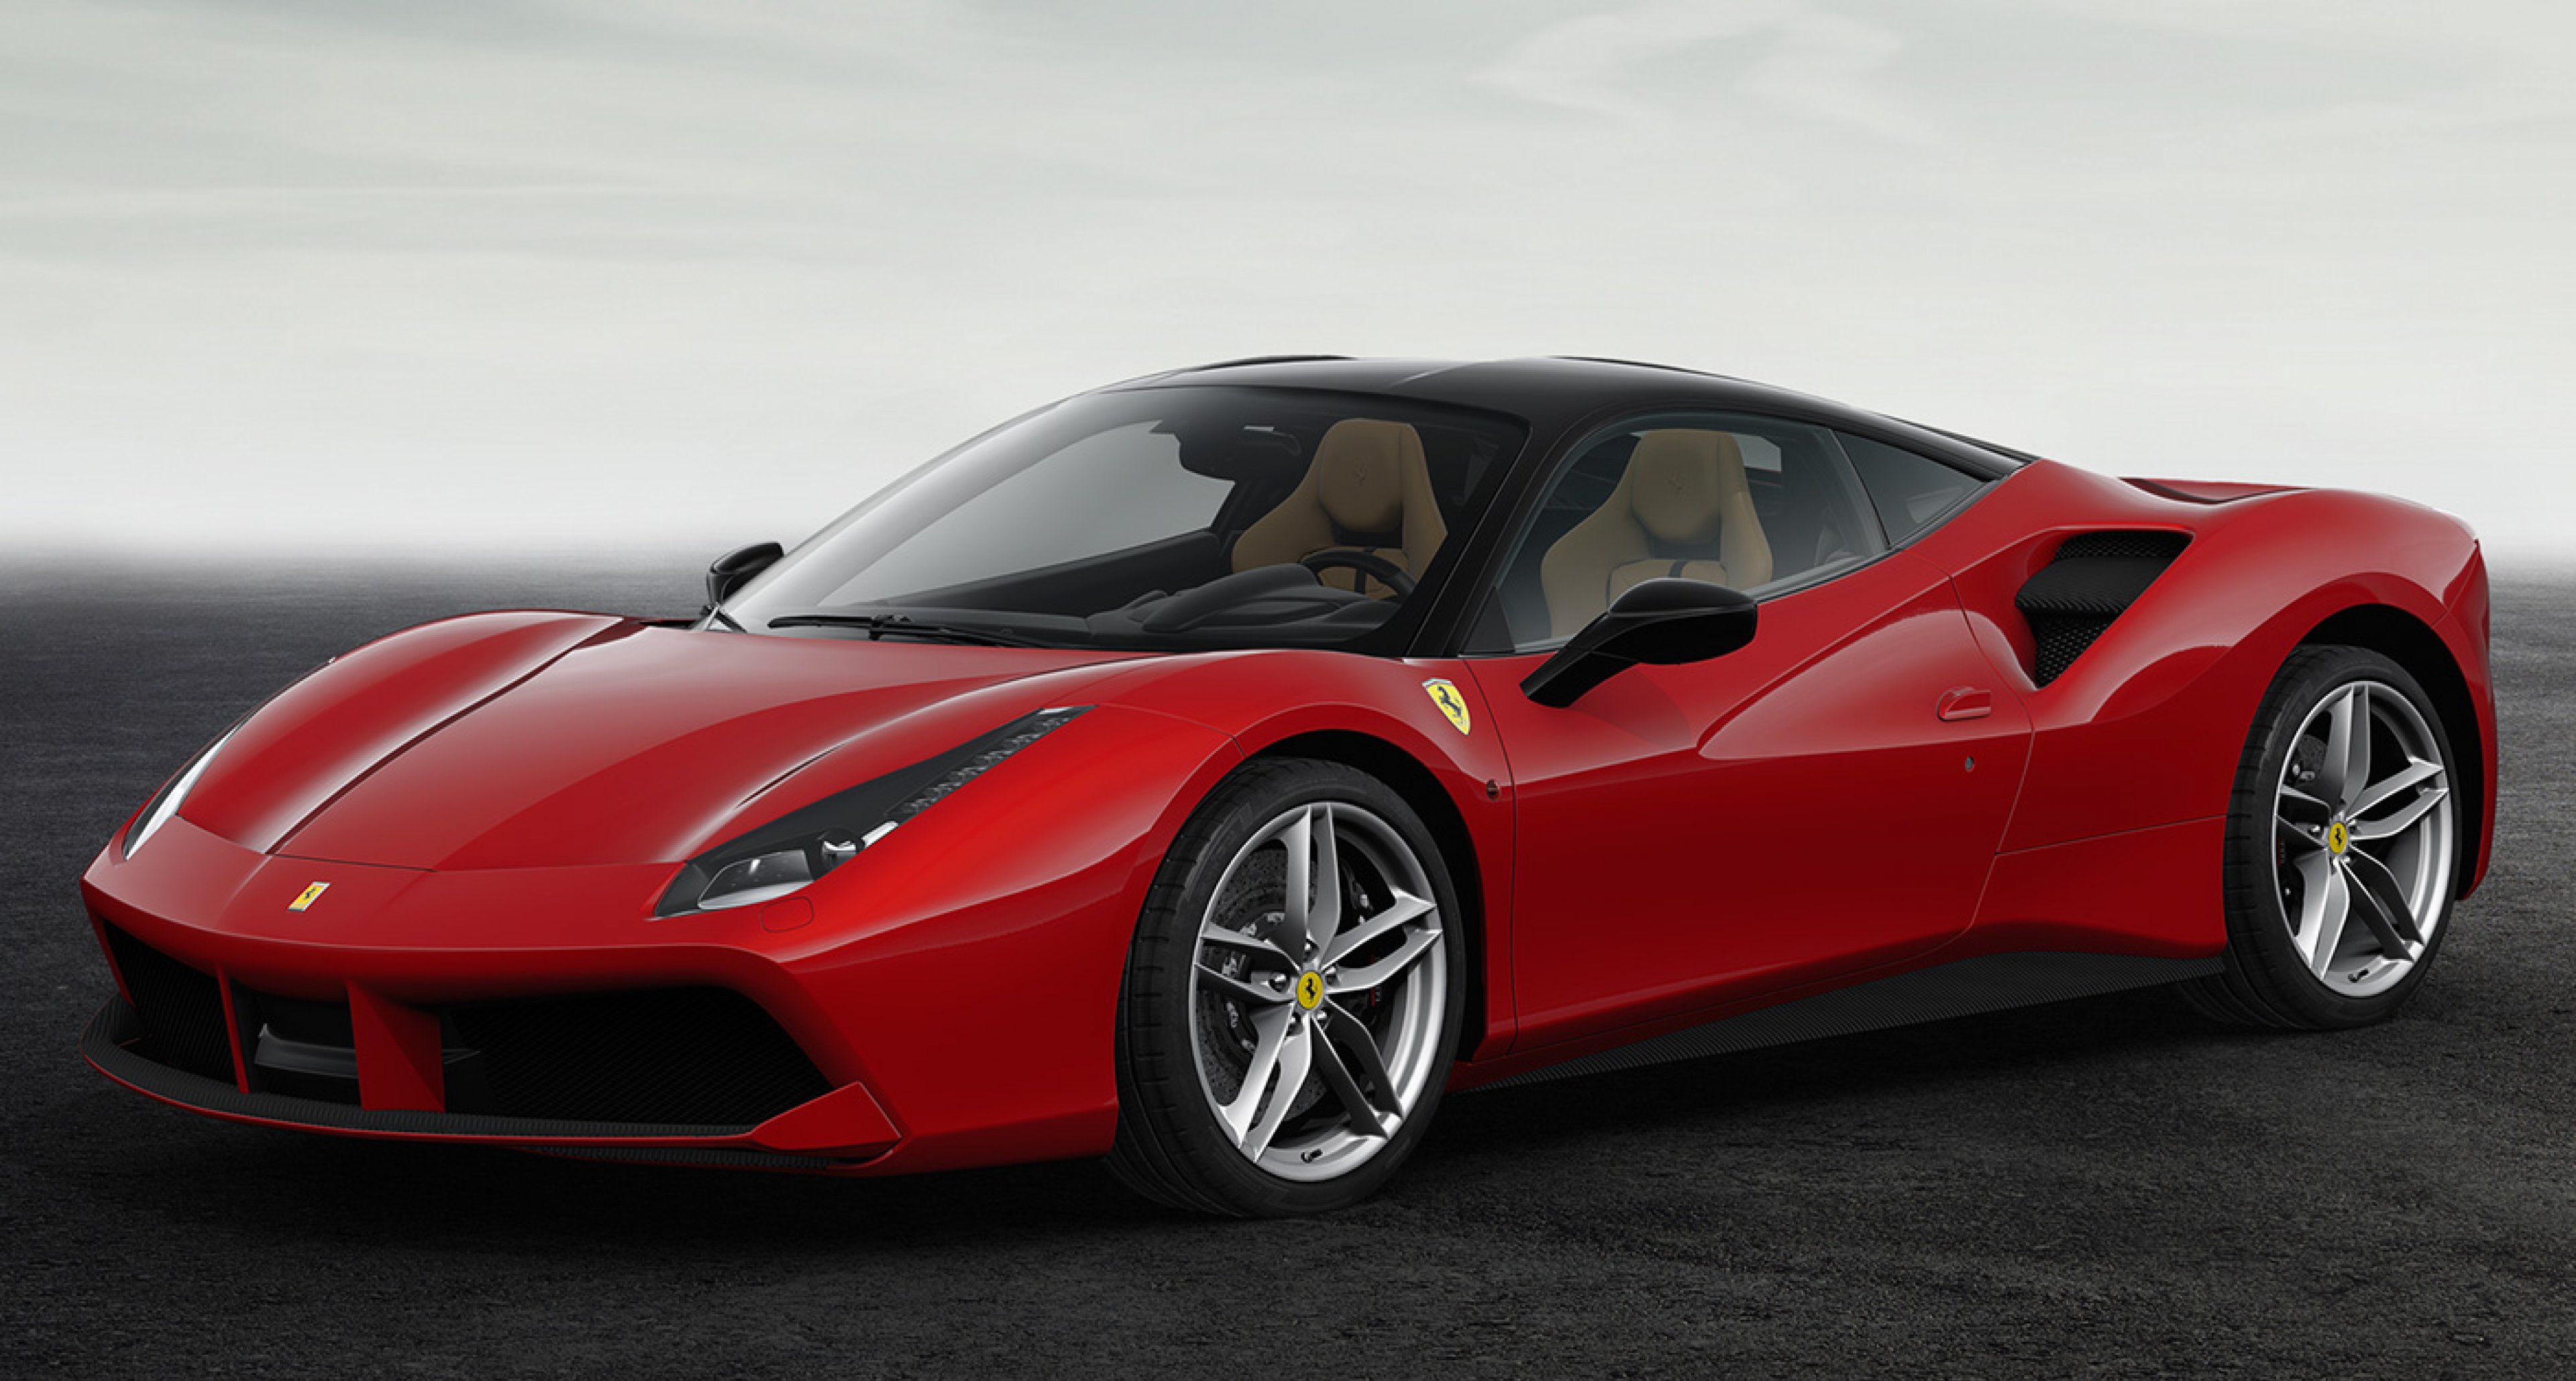 Meet all 70 of Ferrari’s limited-edition anniversary liveries | Classic ...